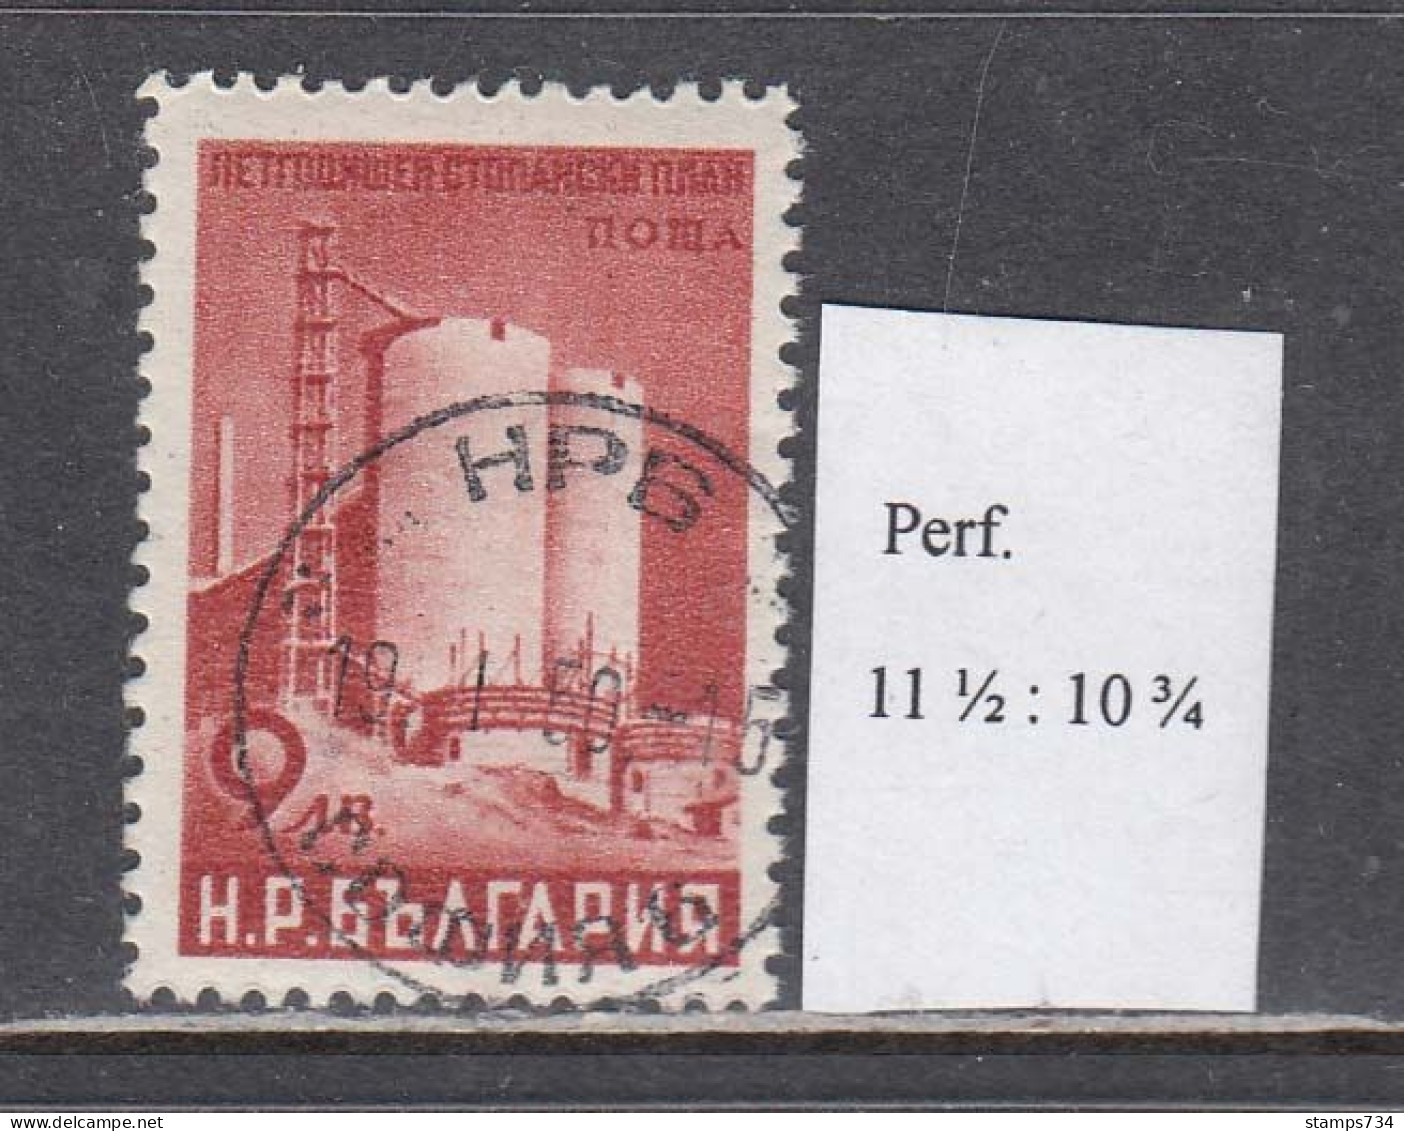 Bulgaria 1949 - Five-year Plan Of The Economy, Mi-Nr. 700, Rare Preforation 11 1/2: 10 3/4, Used - Used Stamps